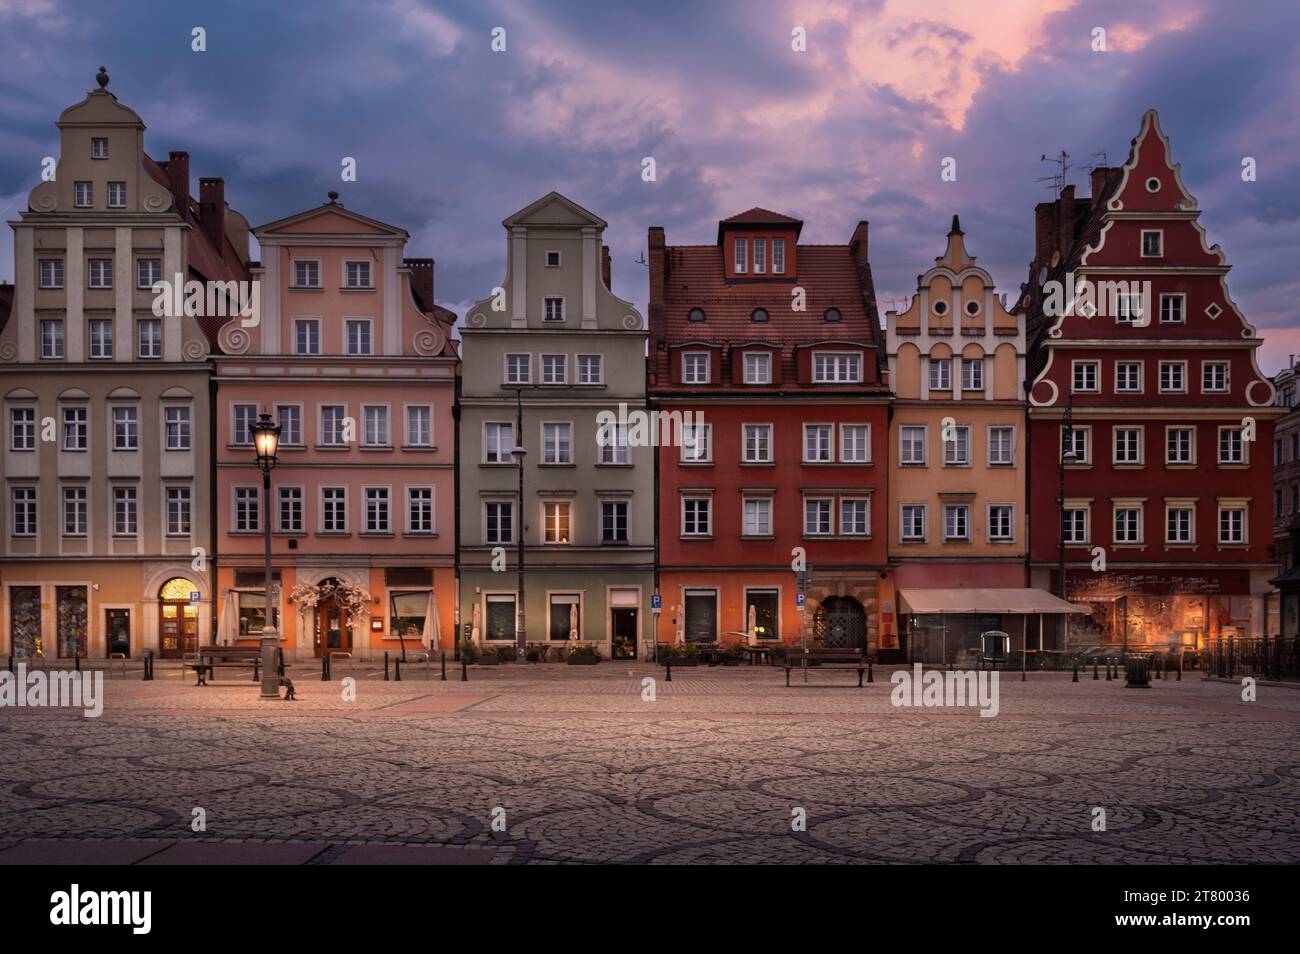 Row of Colourful Houses taken at Plac Solny, Wroclaw, Poland Stock Photo